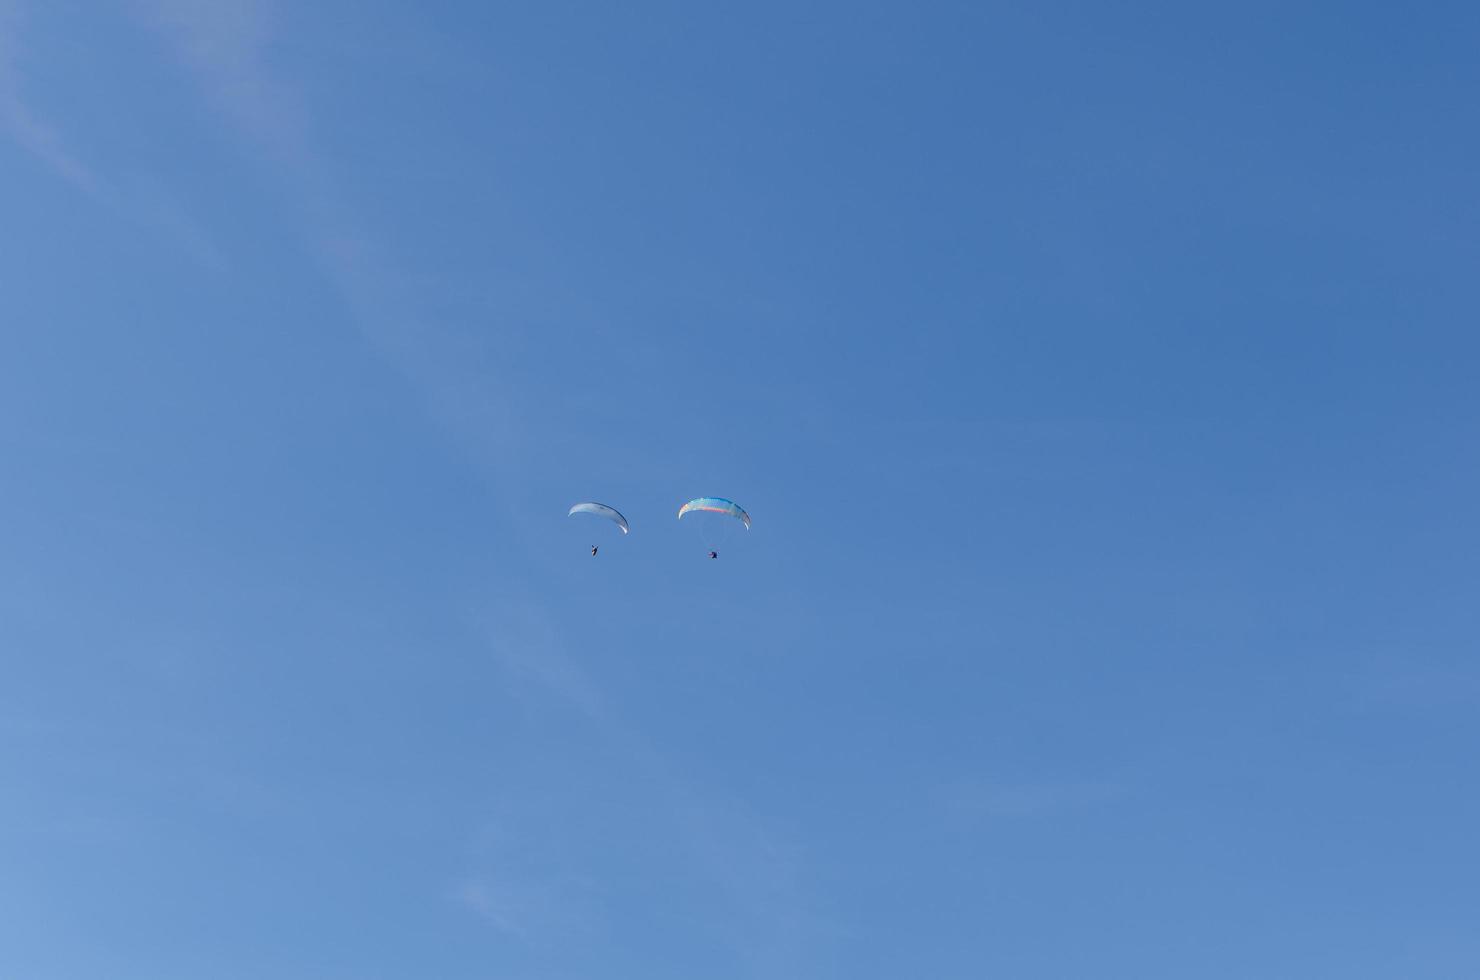 two paragliders on blue sky photo